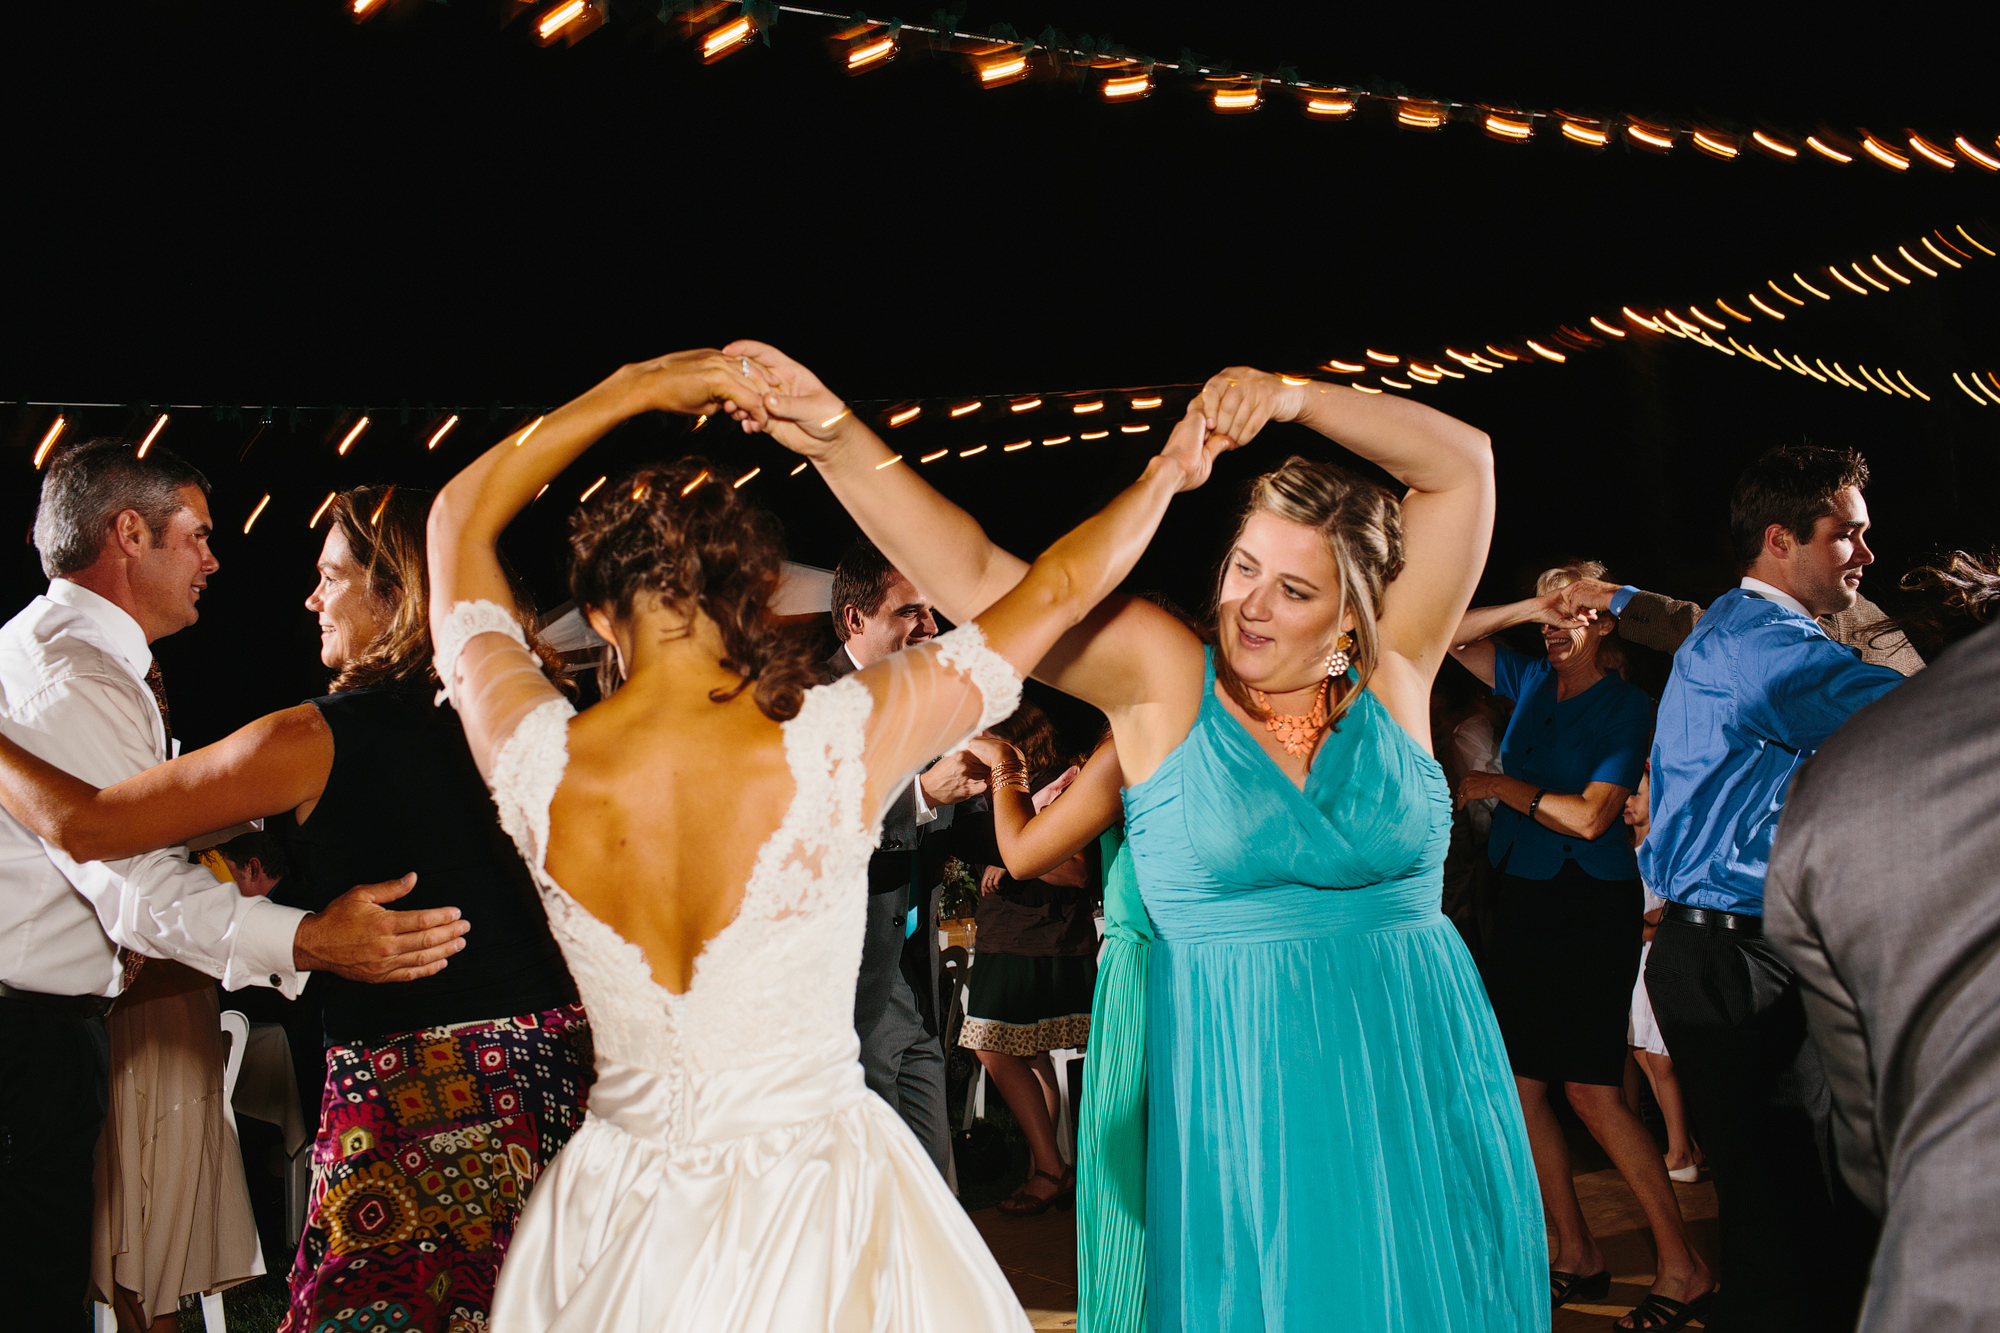 Everyone loves to dance at wedding receptions!